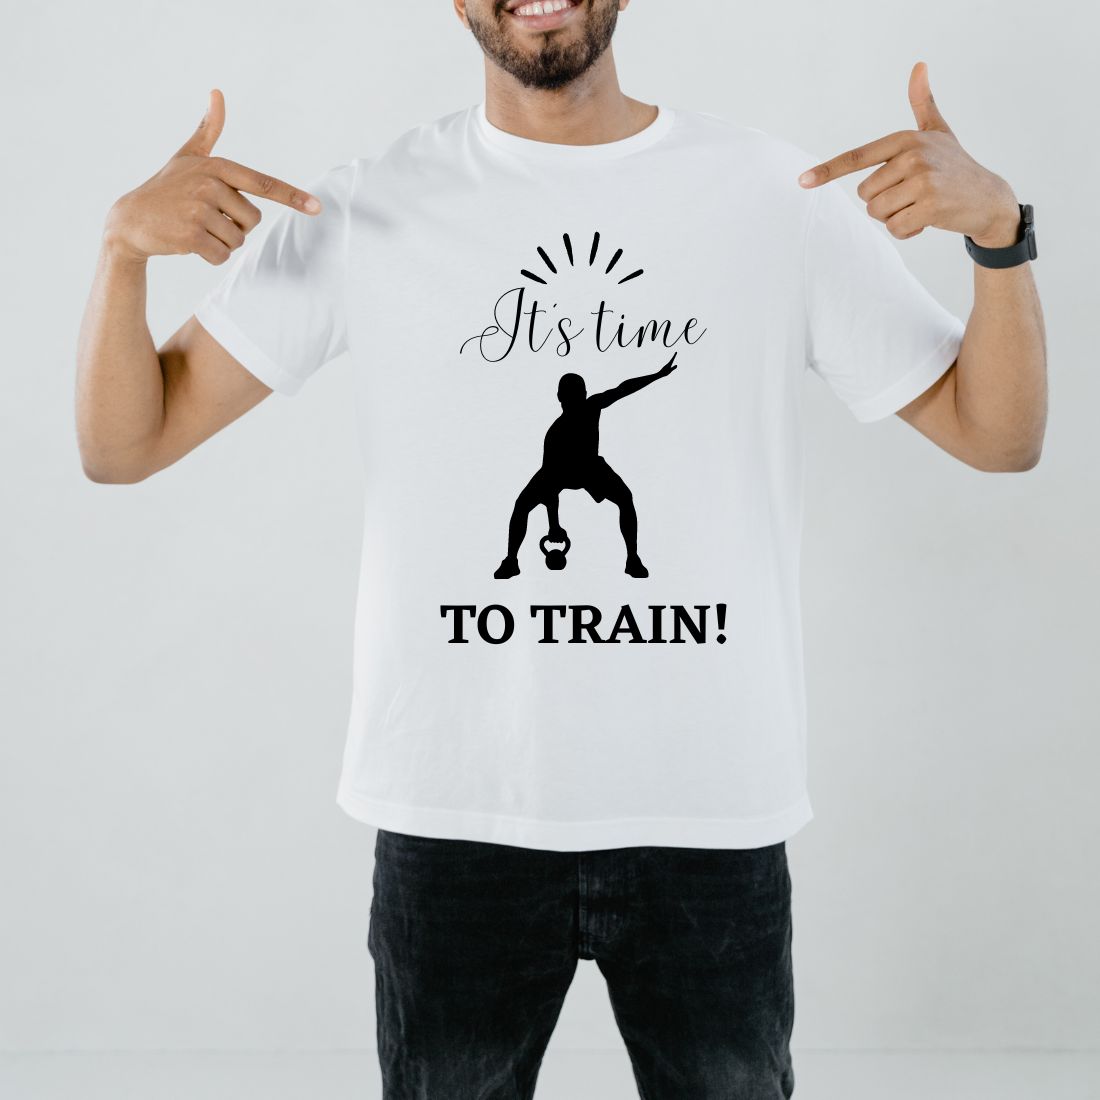 It's time to train! preview image.